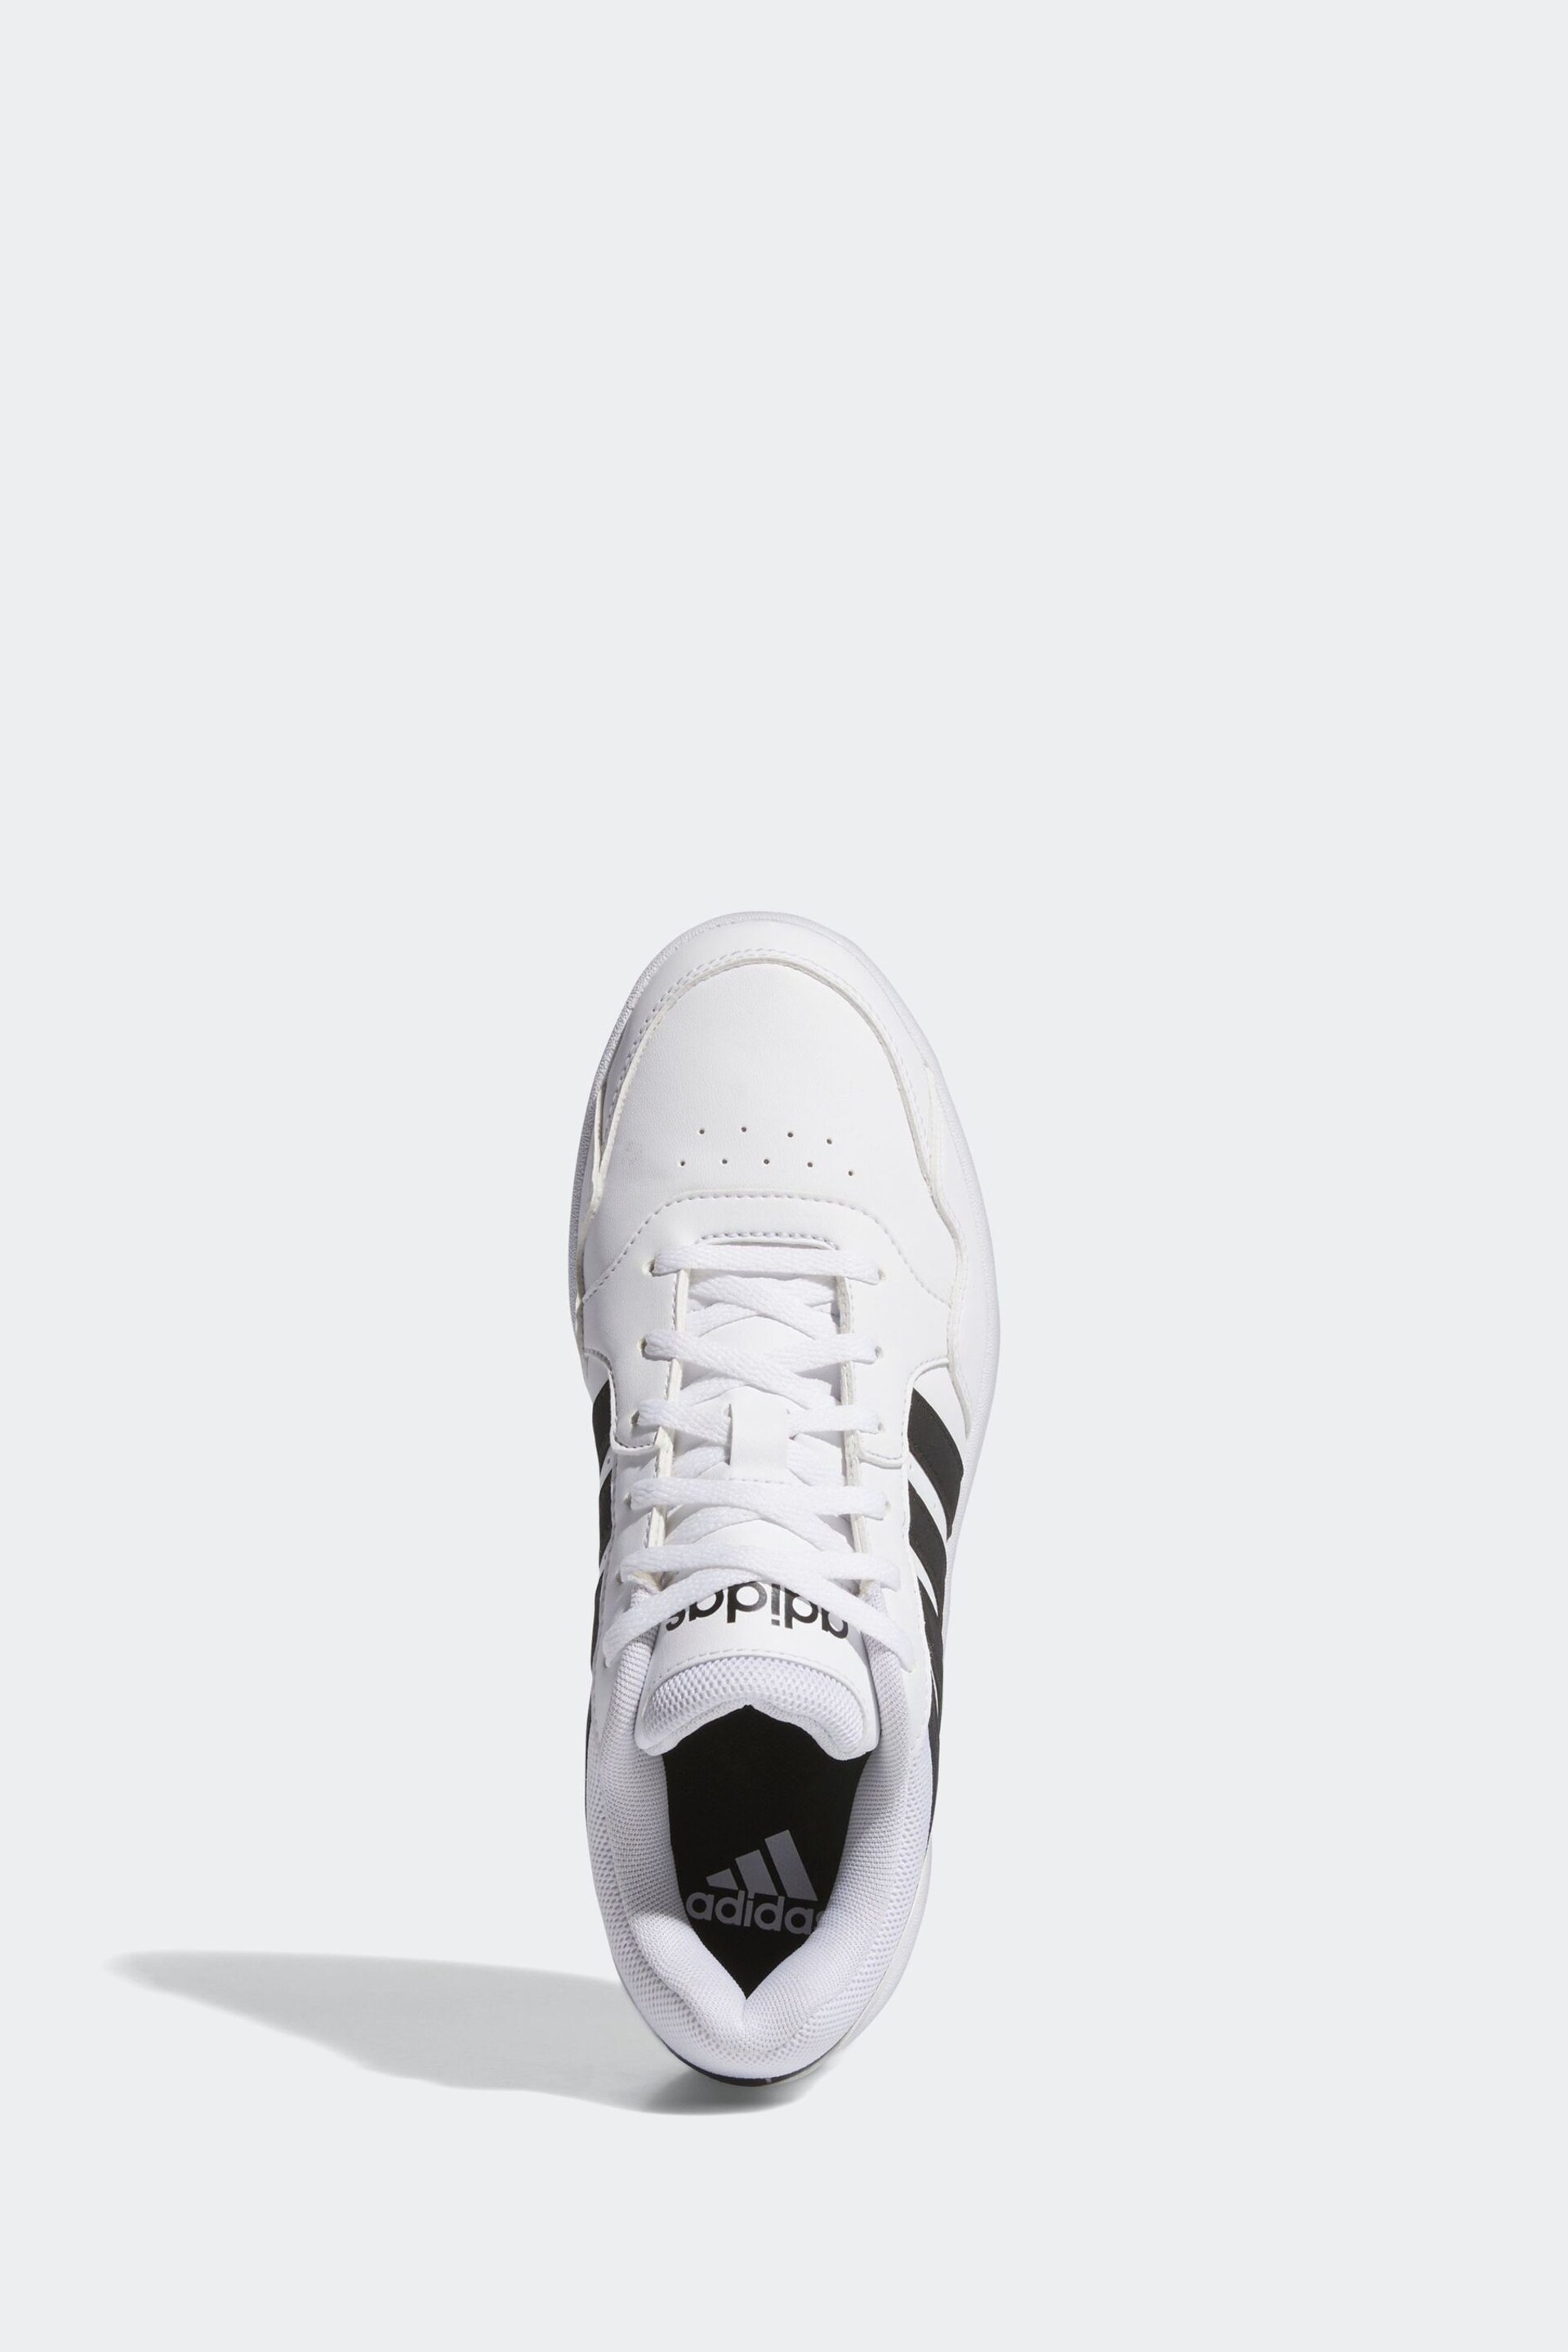 adidas Originals White/Black Hoops 3.0 Bold Trainers - Image 5 of 10